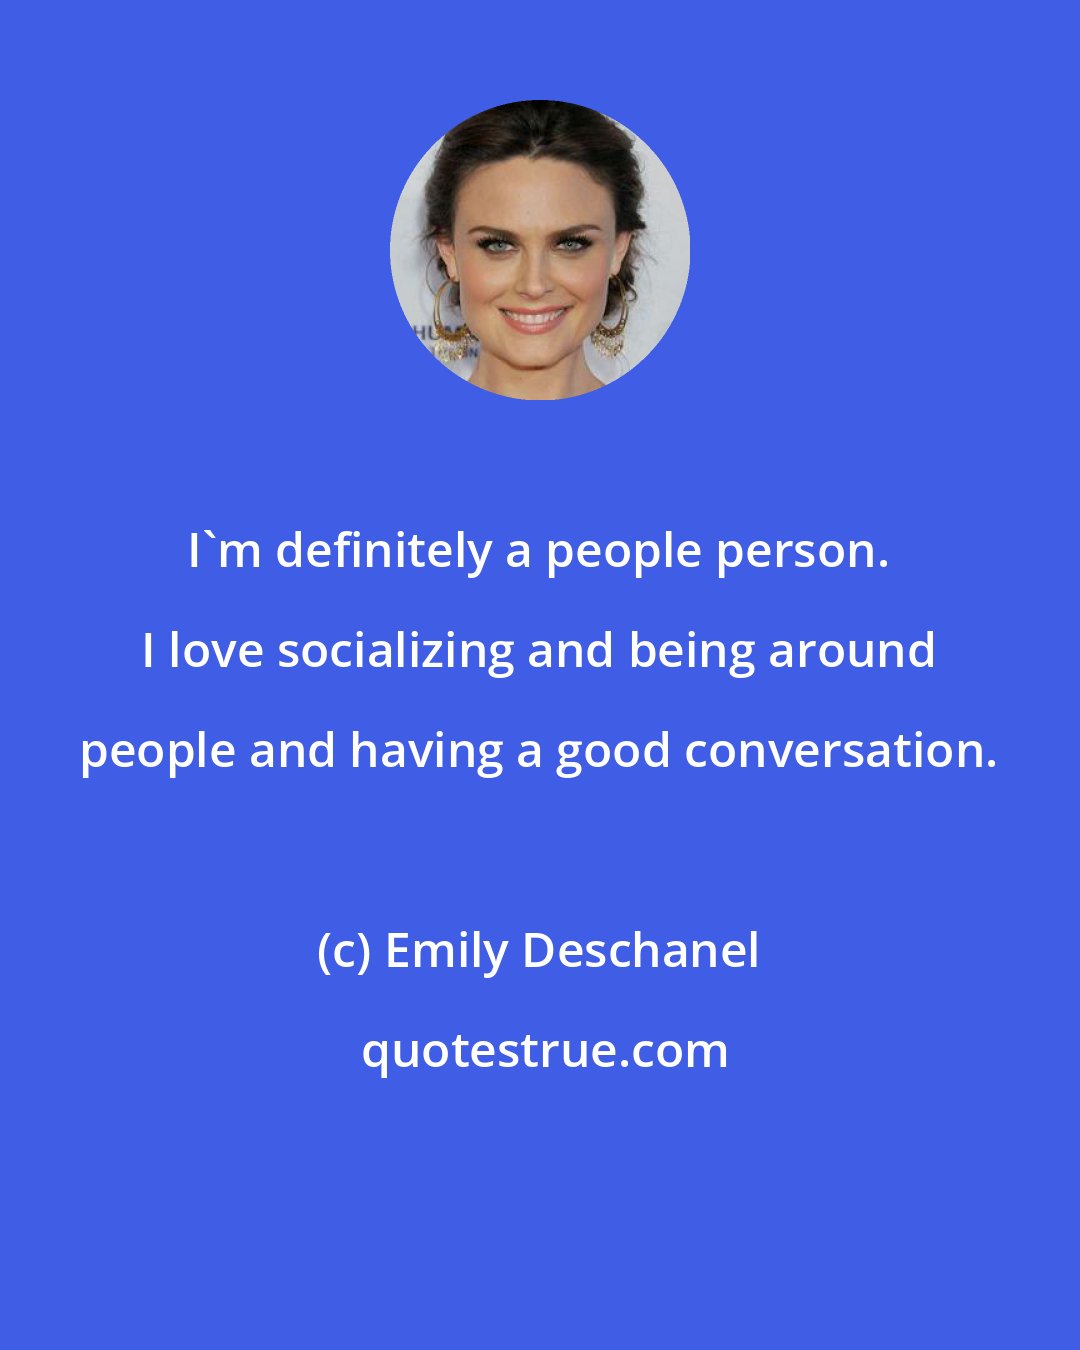 Emily Deschanel: I'm definitely a people person. I love socializing and being around people and having a good conversation.